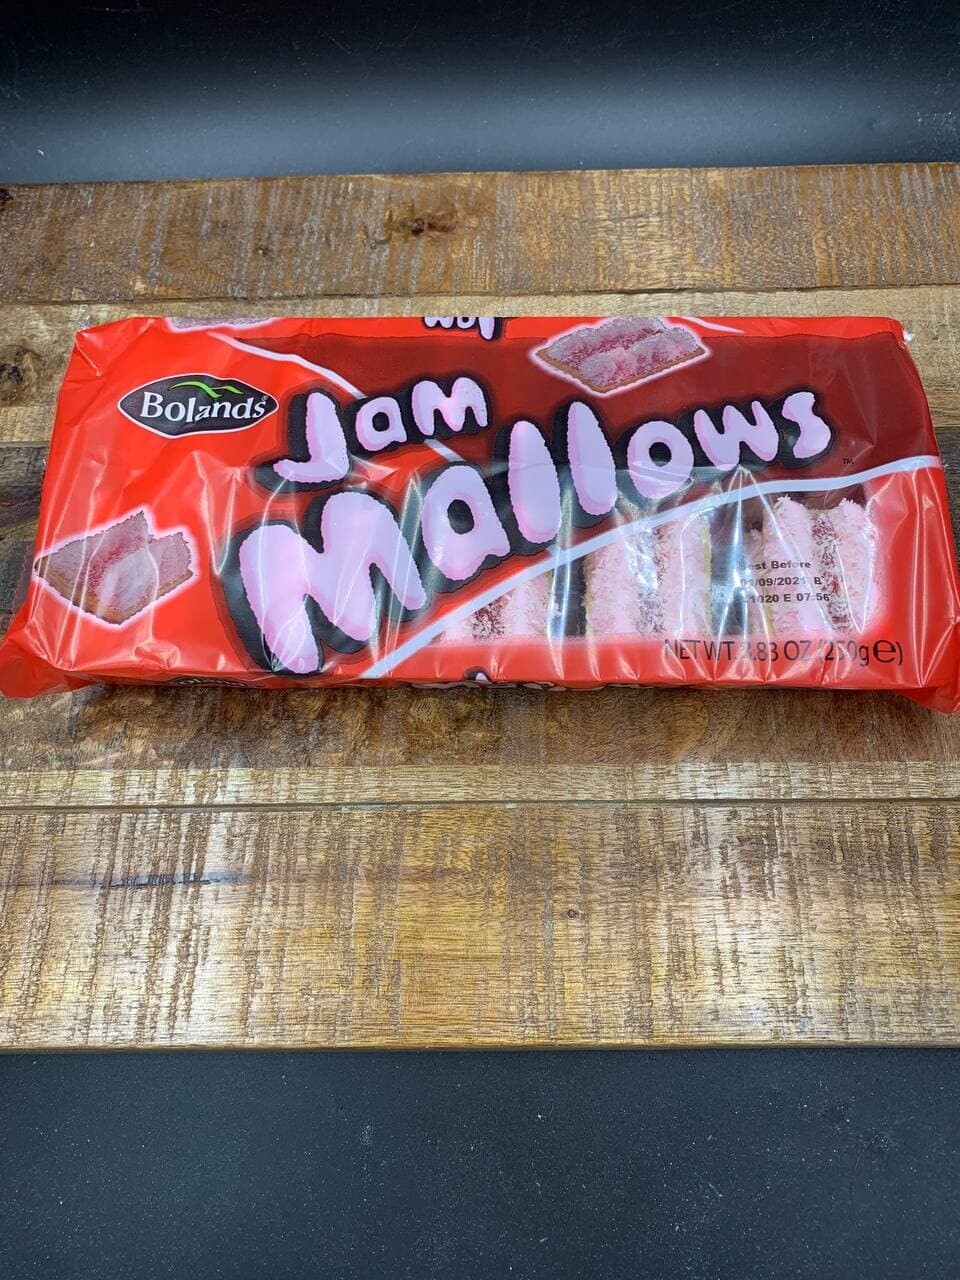 Bolands Jam Mallows 250g PAST DATE PROMO